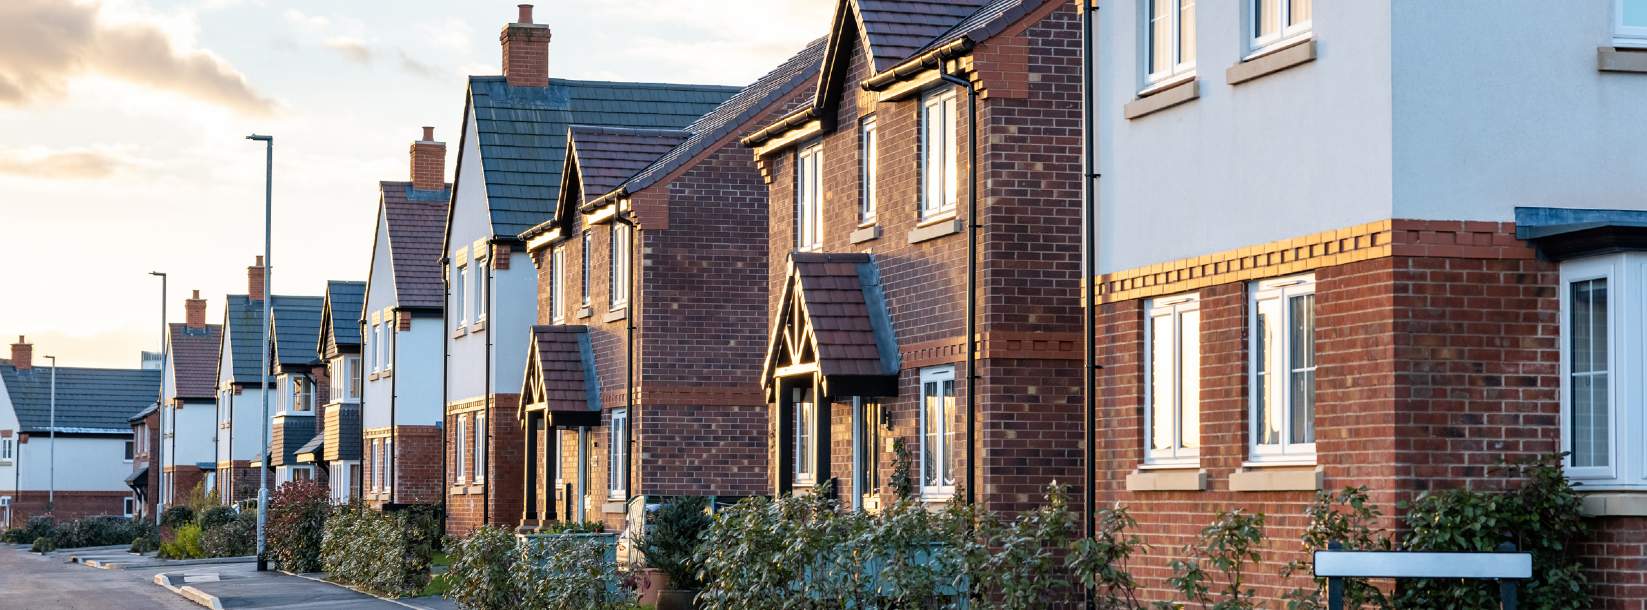 Decarbonising the housing association sector